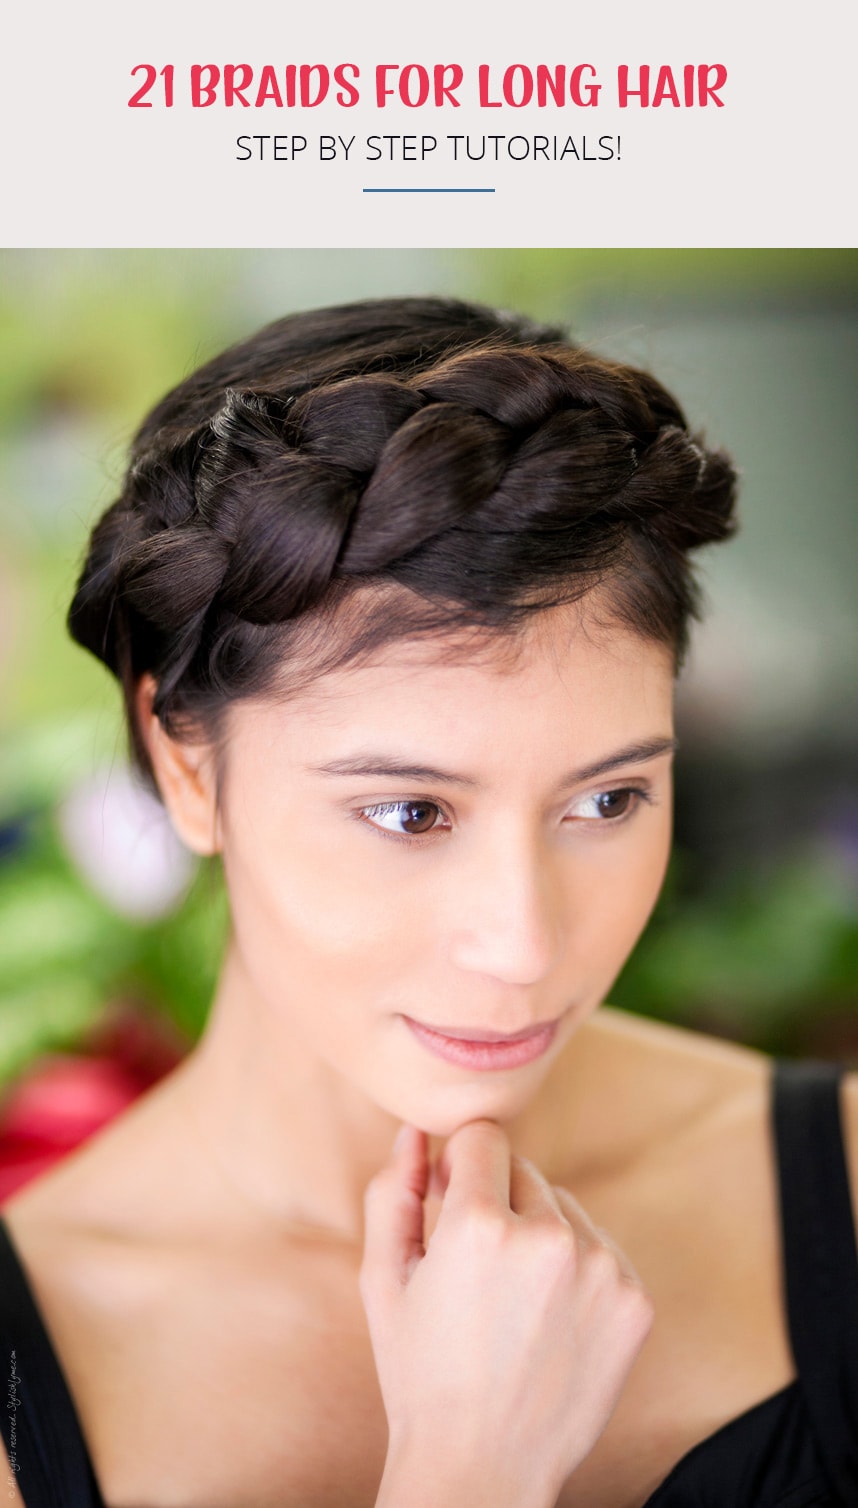 21 Braids for Long Hair that You